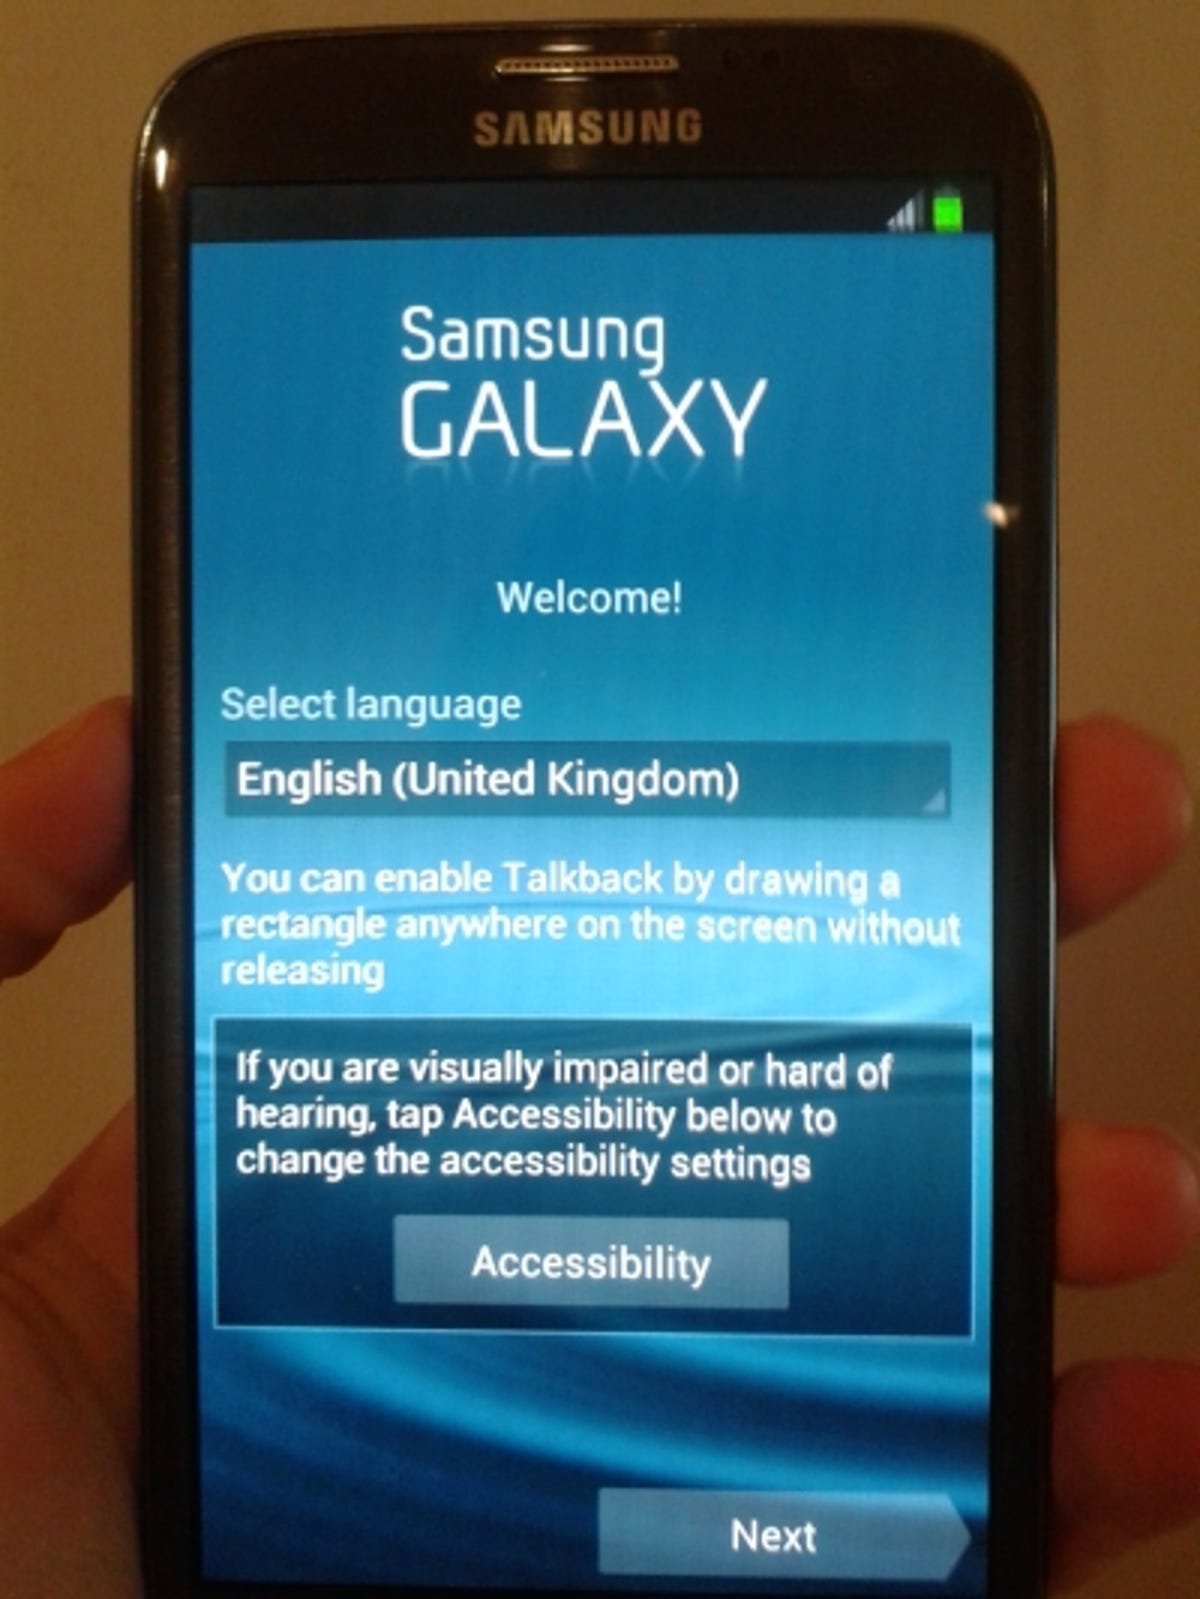 Galaxy Note 2 bootup